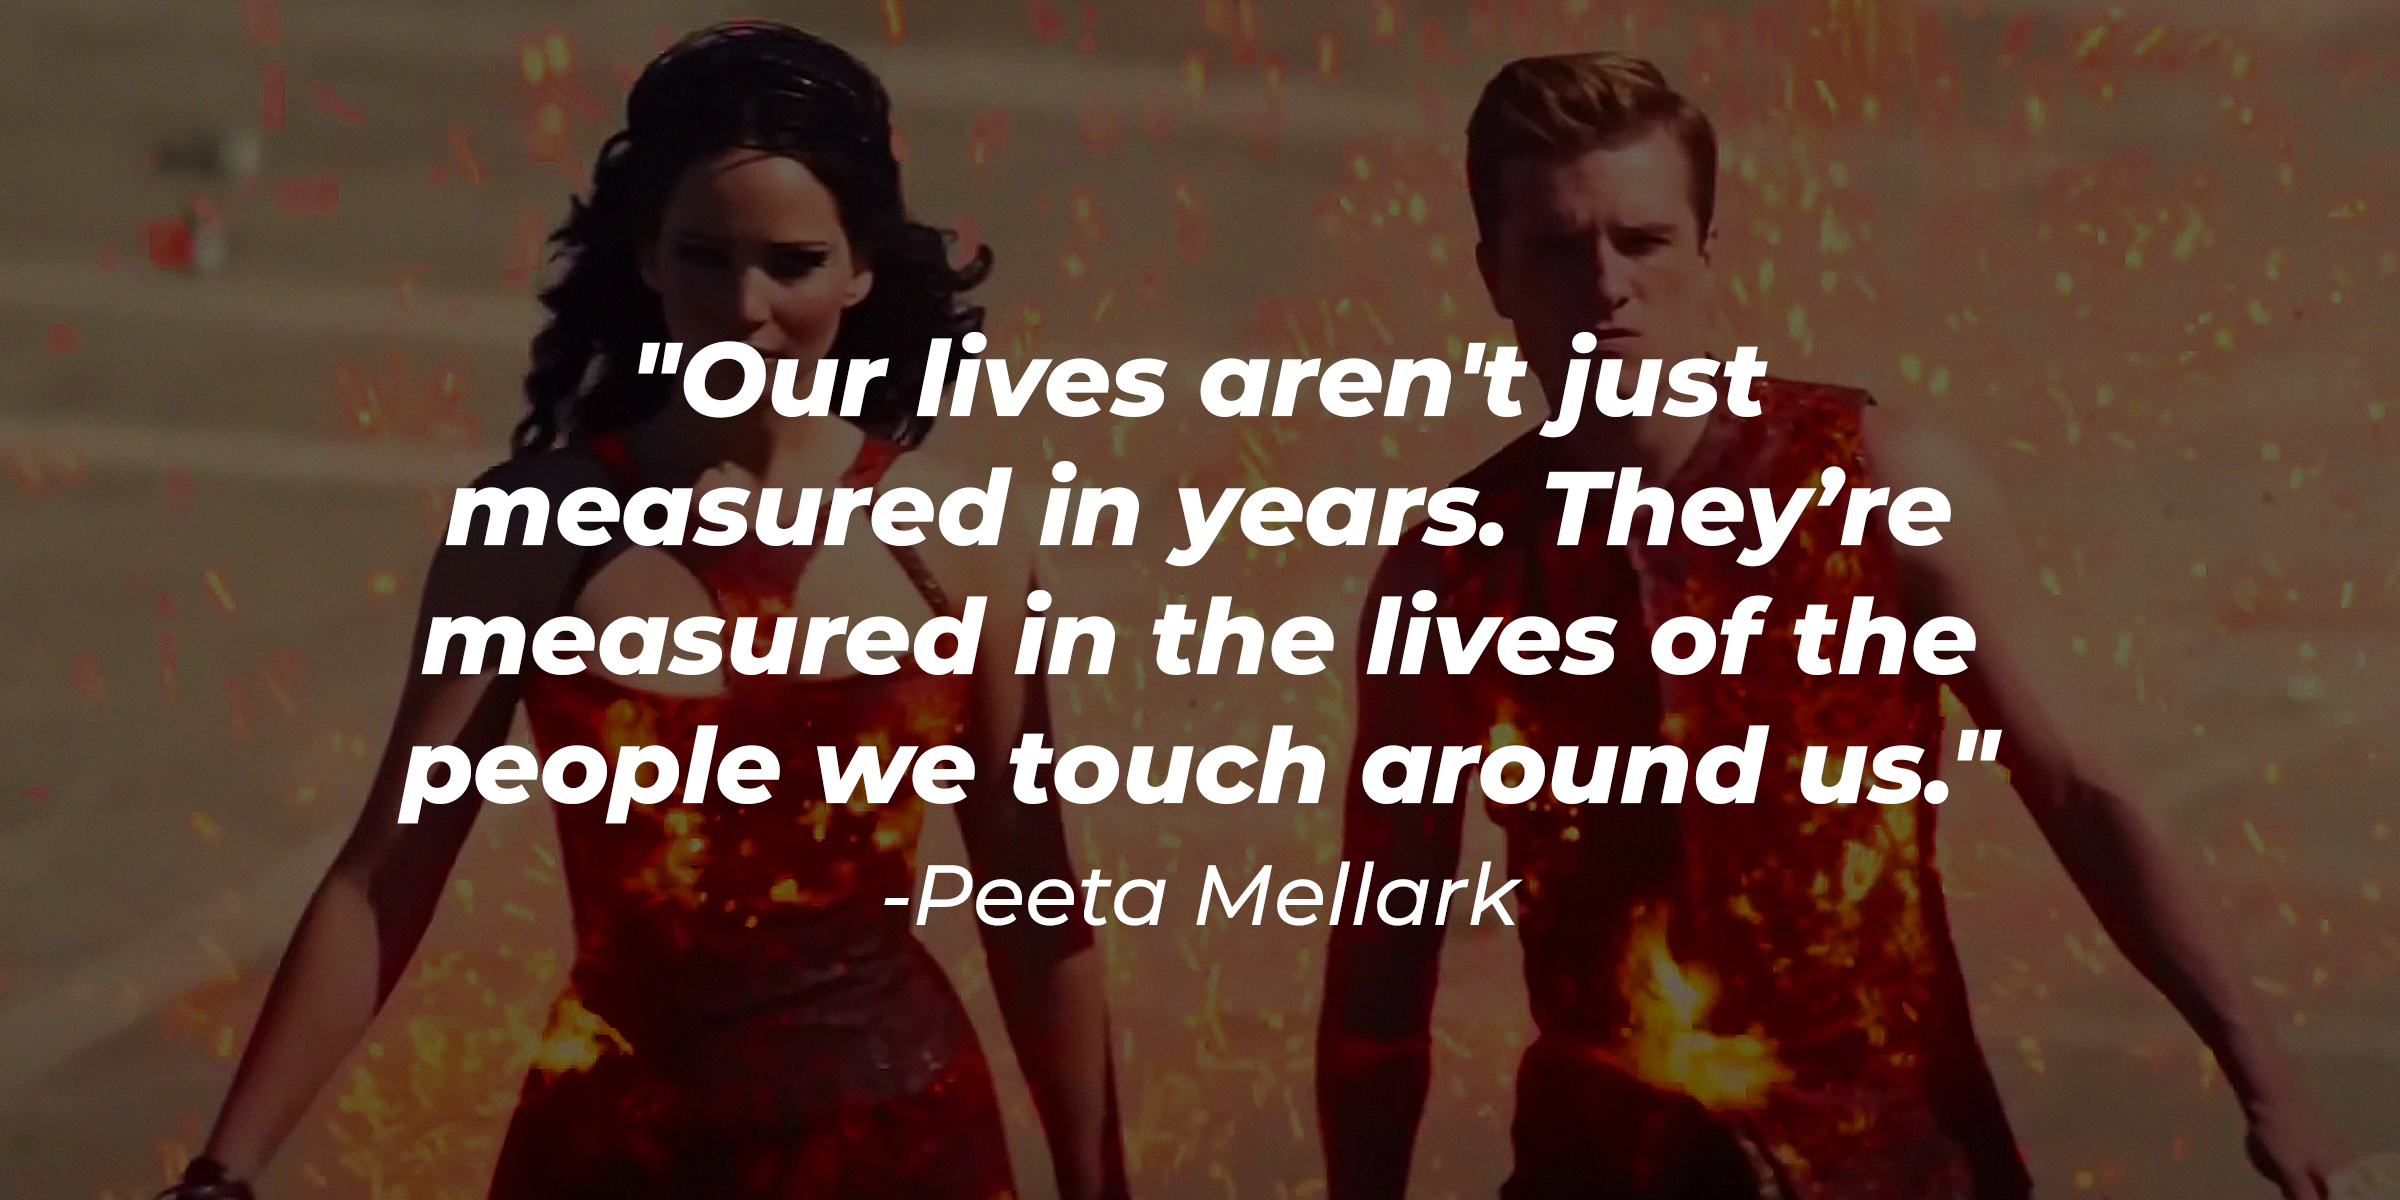 Peeta Mellark and Katniss Everdeen, with Mellark’s quote: "Our lives aren’t just measured in years. They’re measured in the lives of the people we touch around us." | Source: Youtube.com/TheHungerGamesMovies